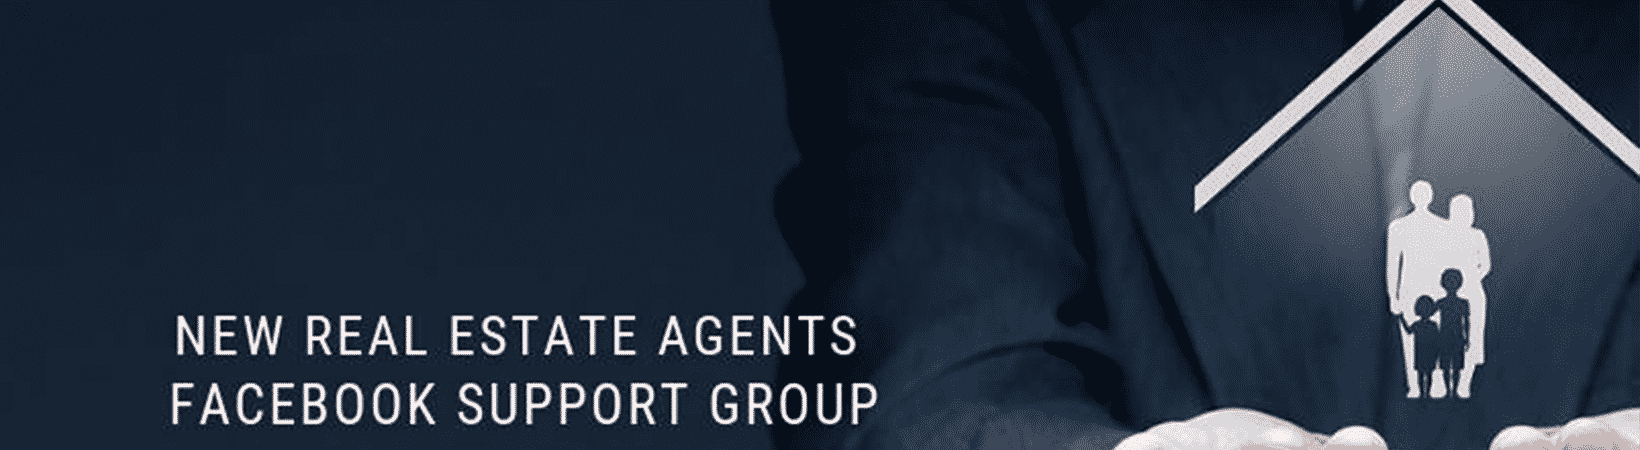 New Real Estate Agents Facebook Support Group